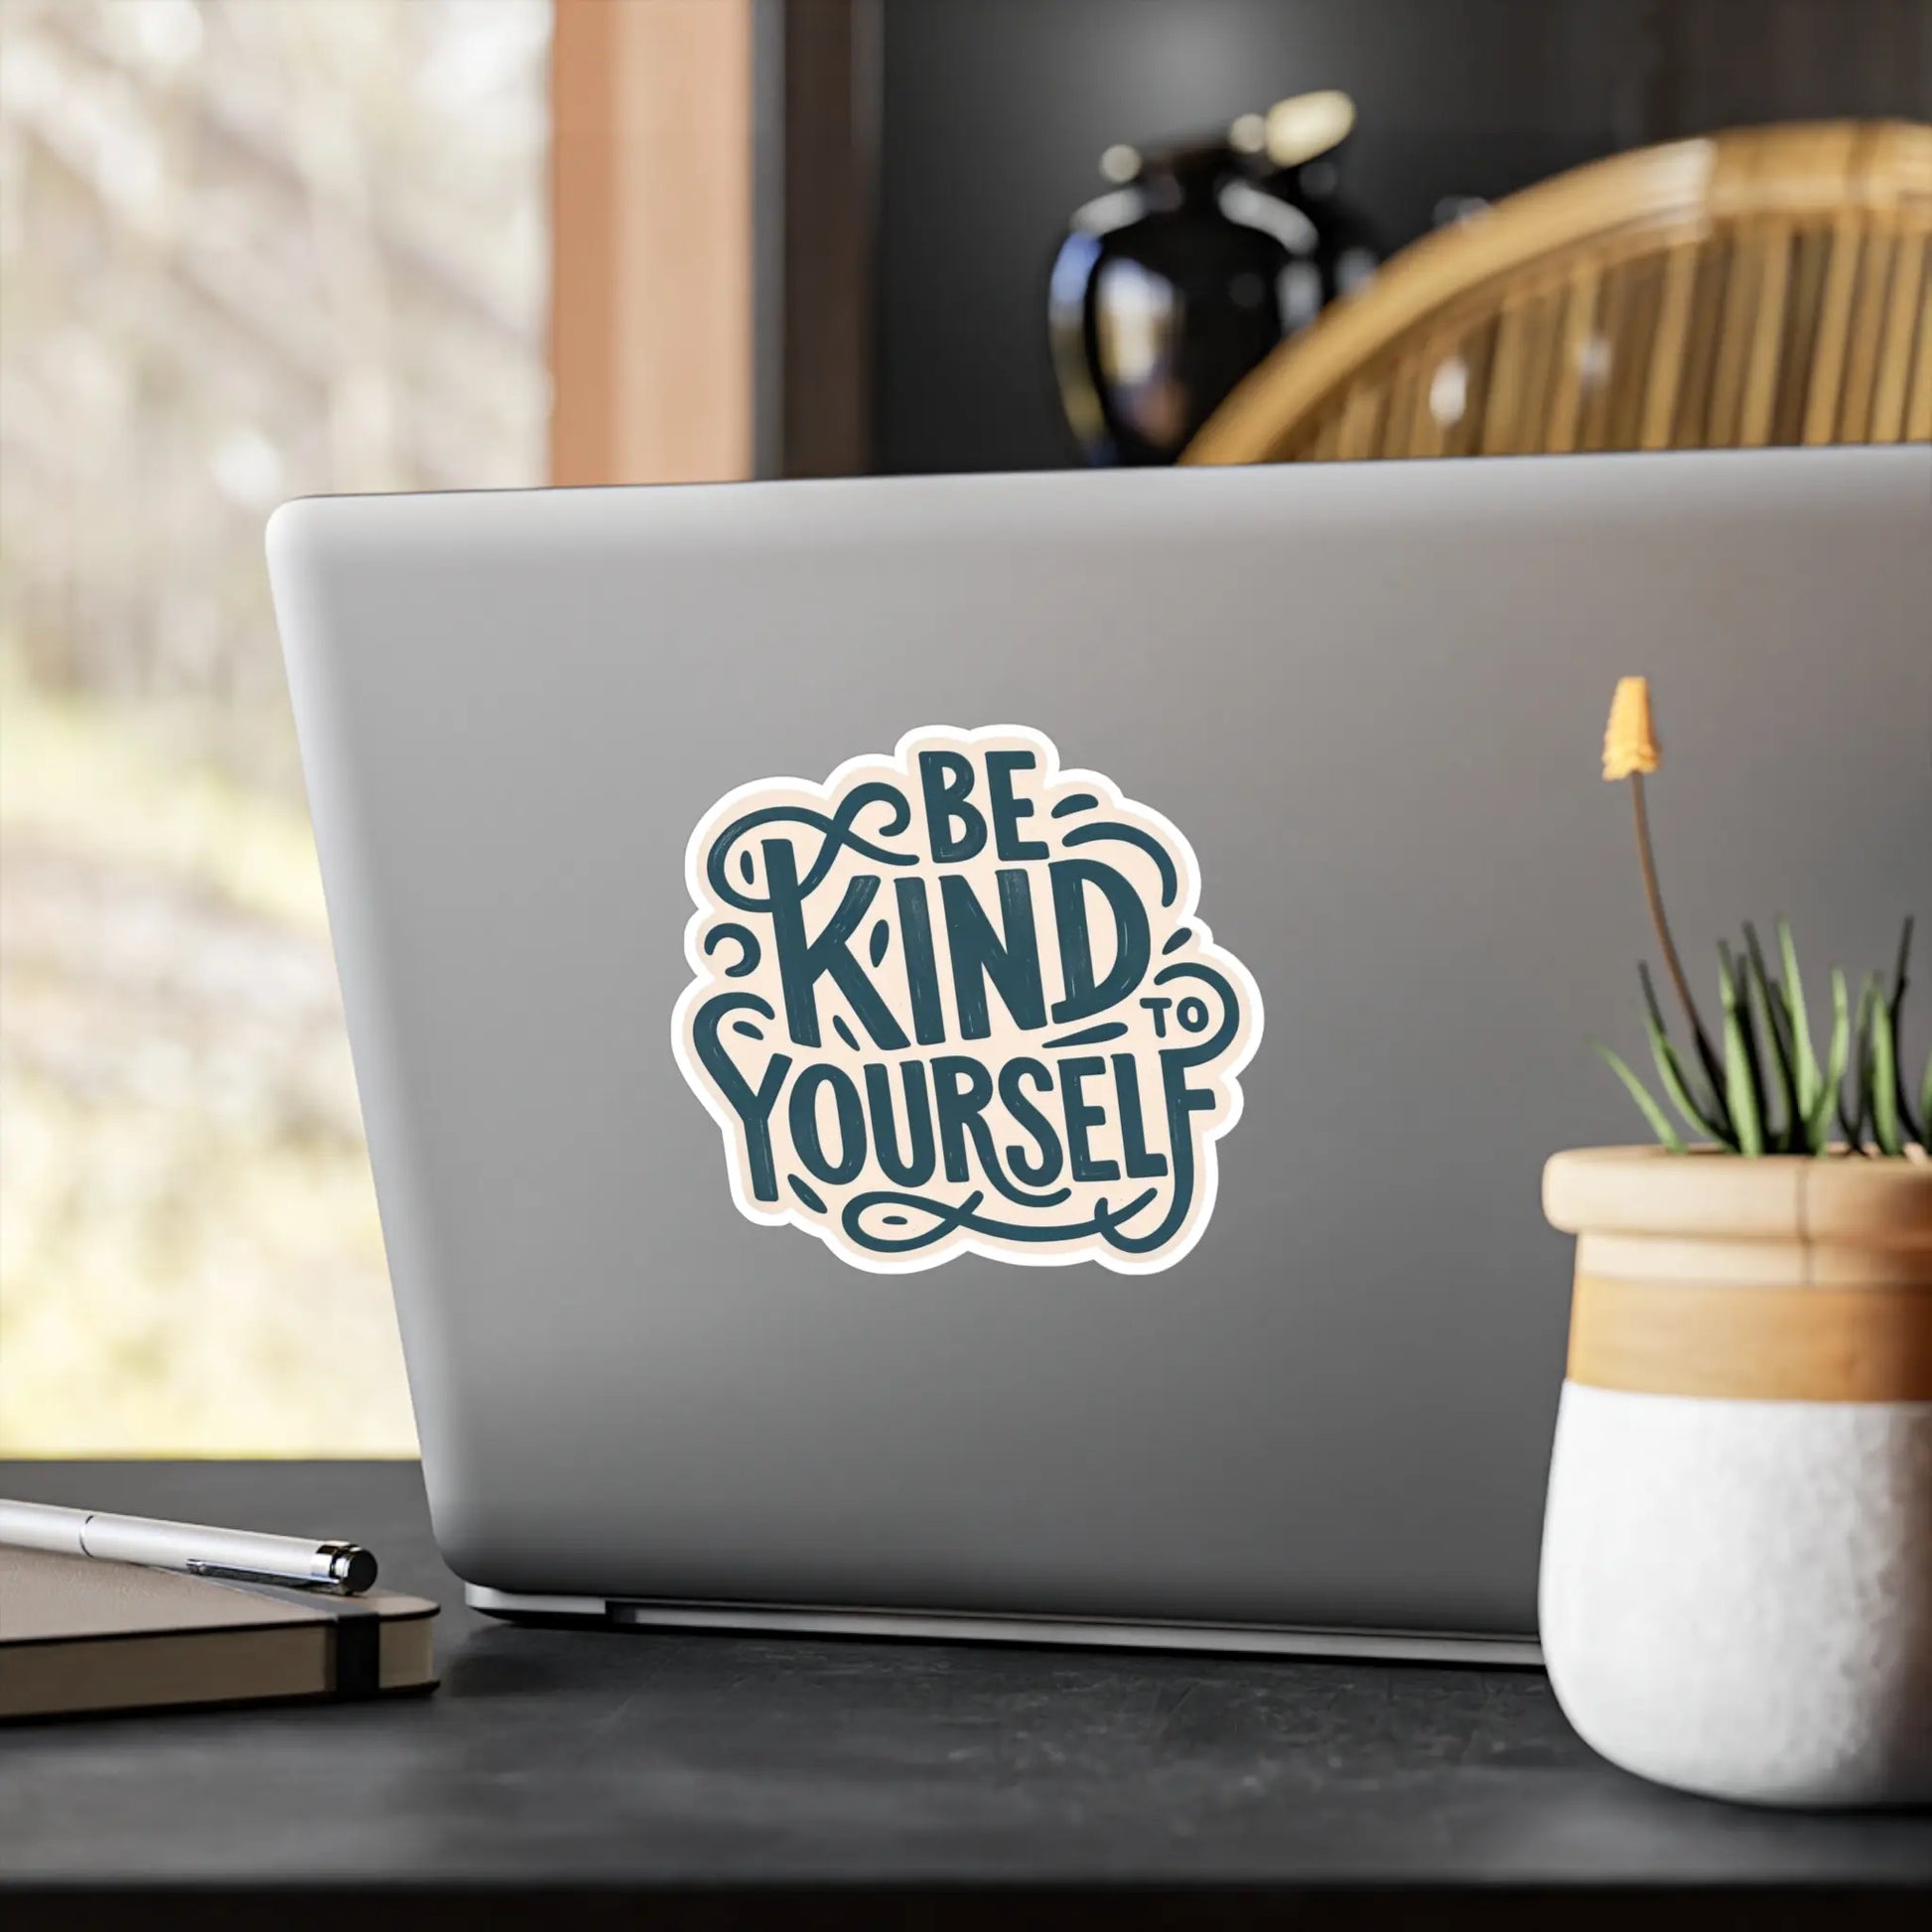 Kiss-Cut Vinyl Decal – "Be Kind to Yourself" Sticker